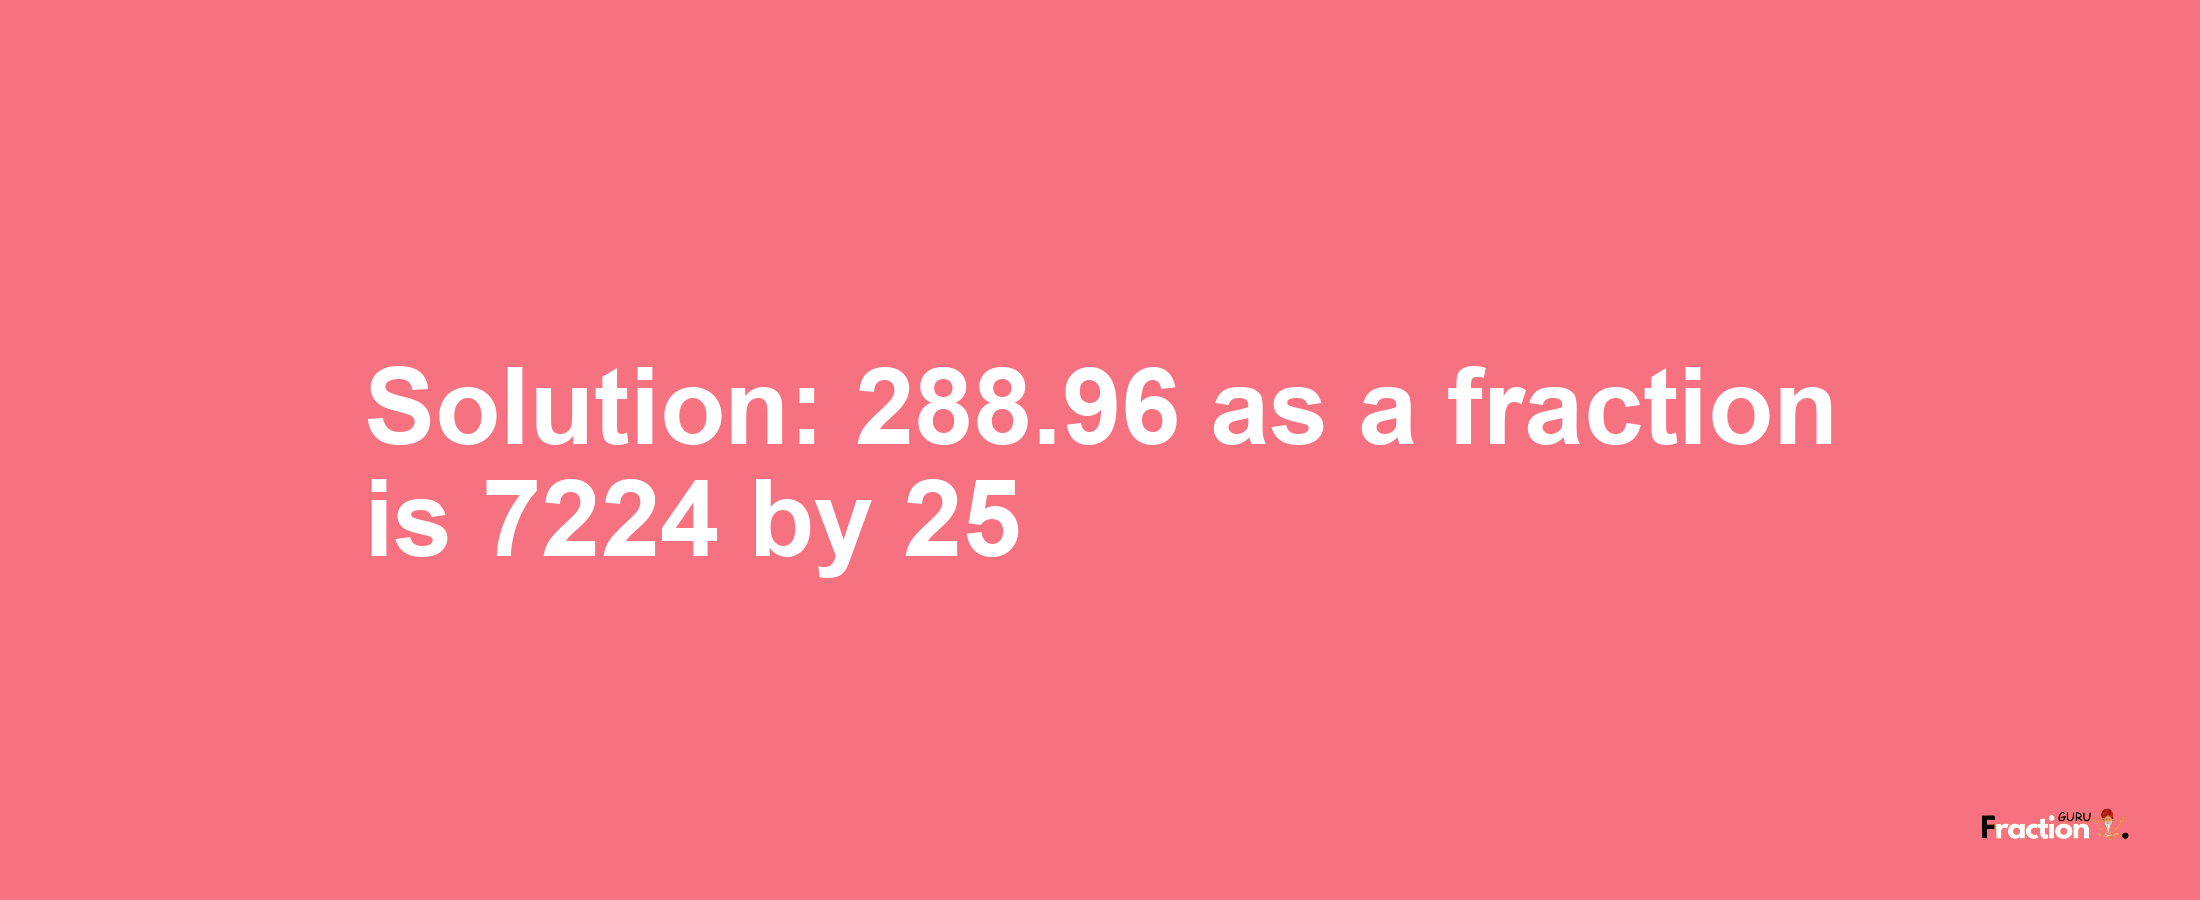 Solution:288.96 as a fraction is 7224/25